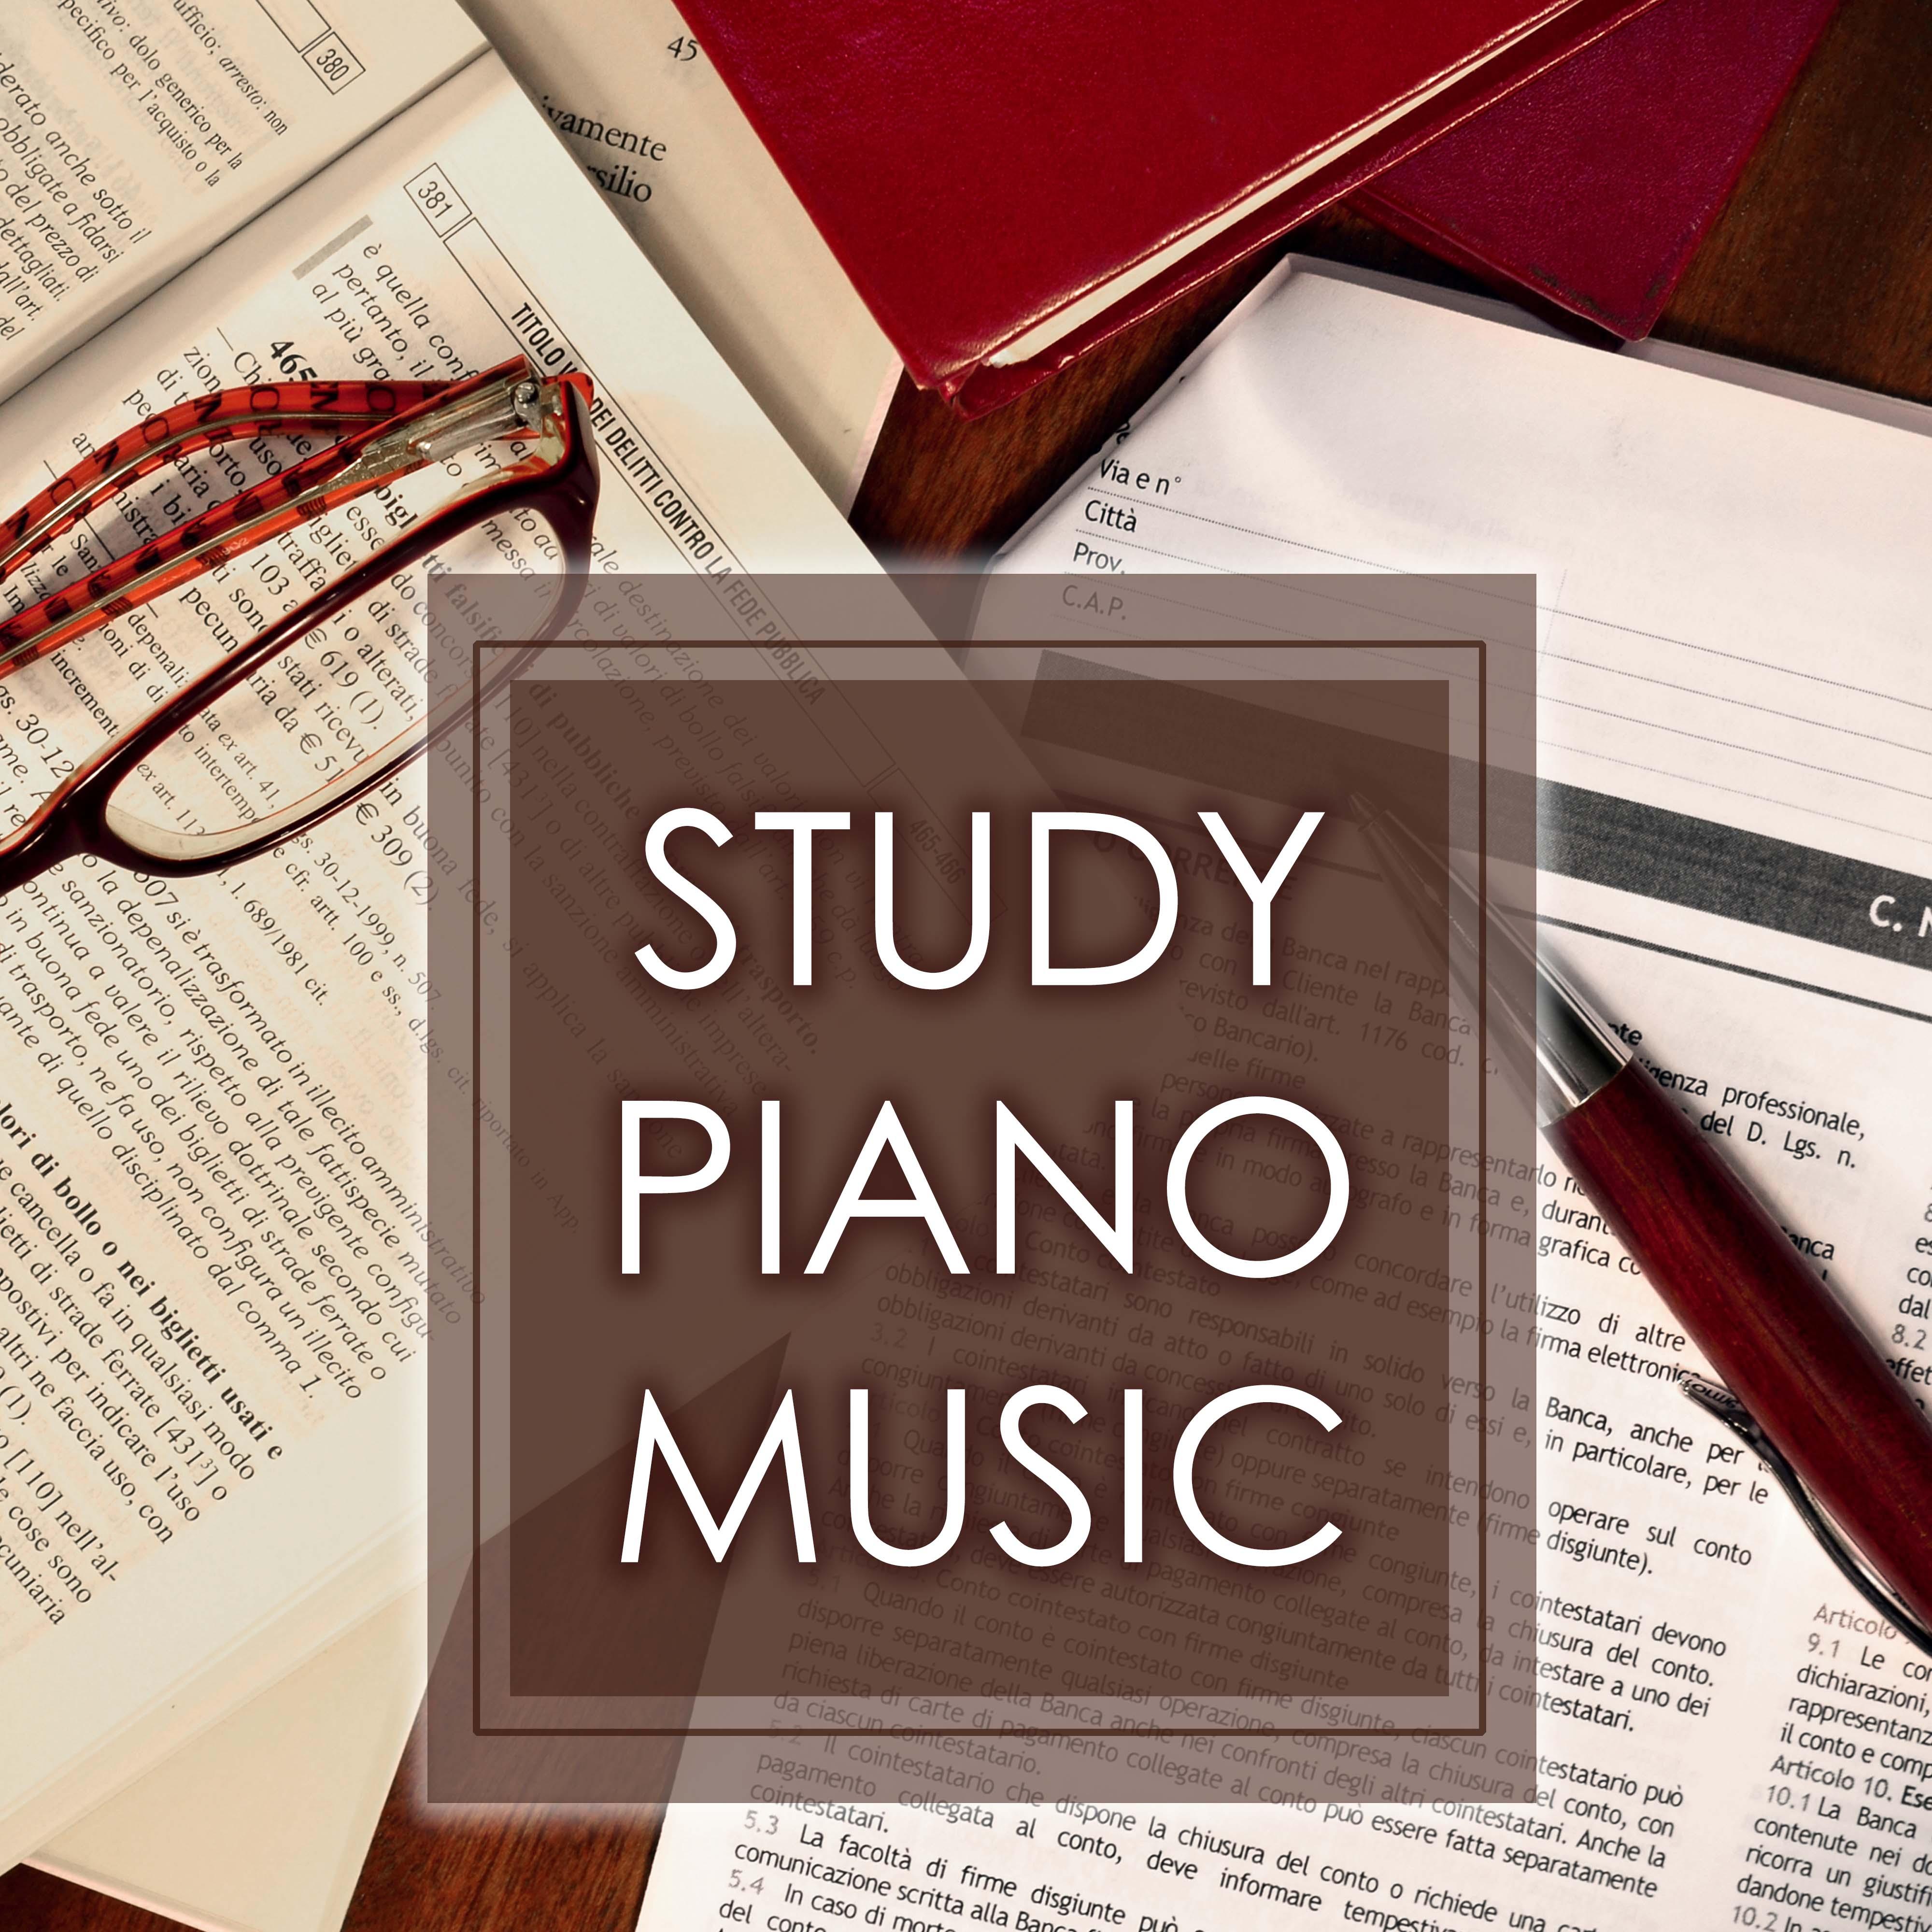 Study Piano Music - Instrumental Pianoscapes for Studying